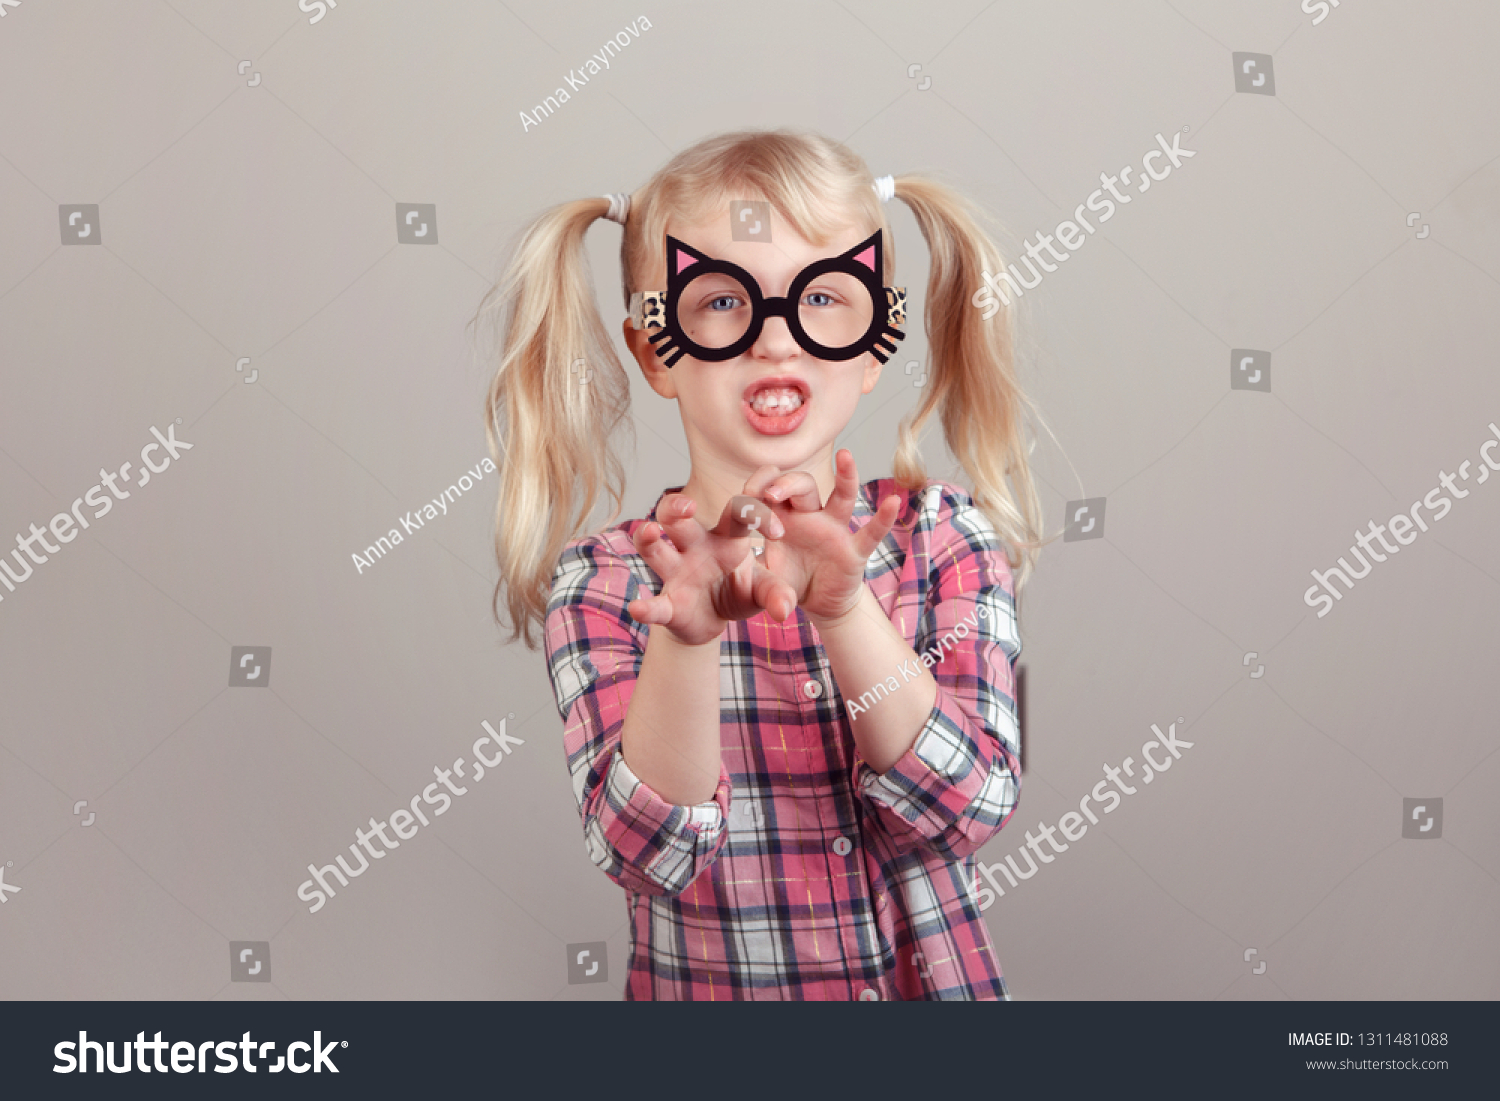 Closeup portrait of cute adorable blonde Caucasian preschool girl wearing funny cat glasses and playing, acting, making faces. Kid expressing emotions. April fool's day concept. #1311481088